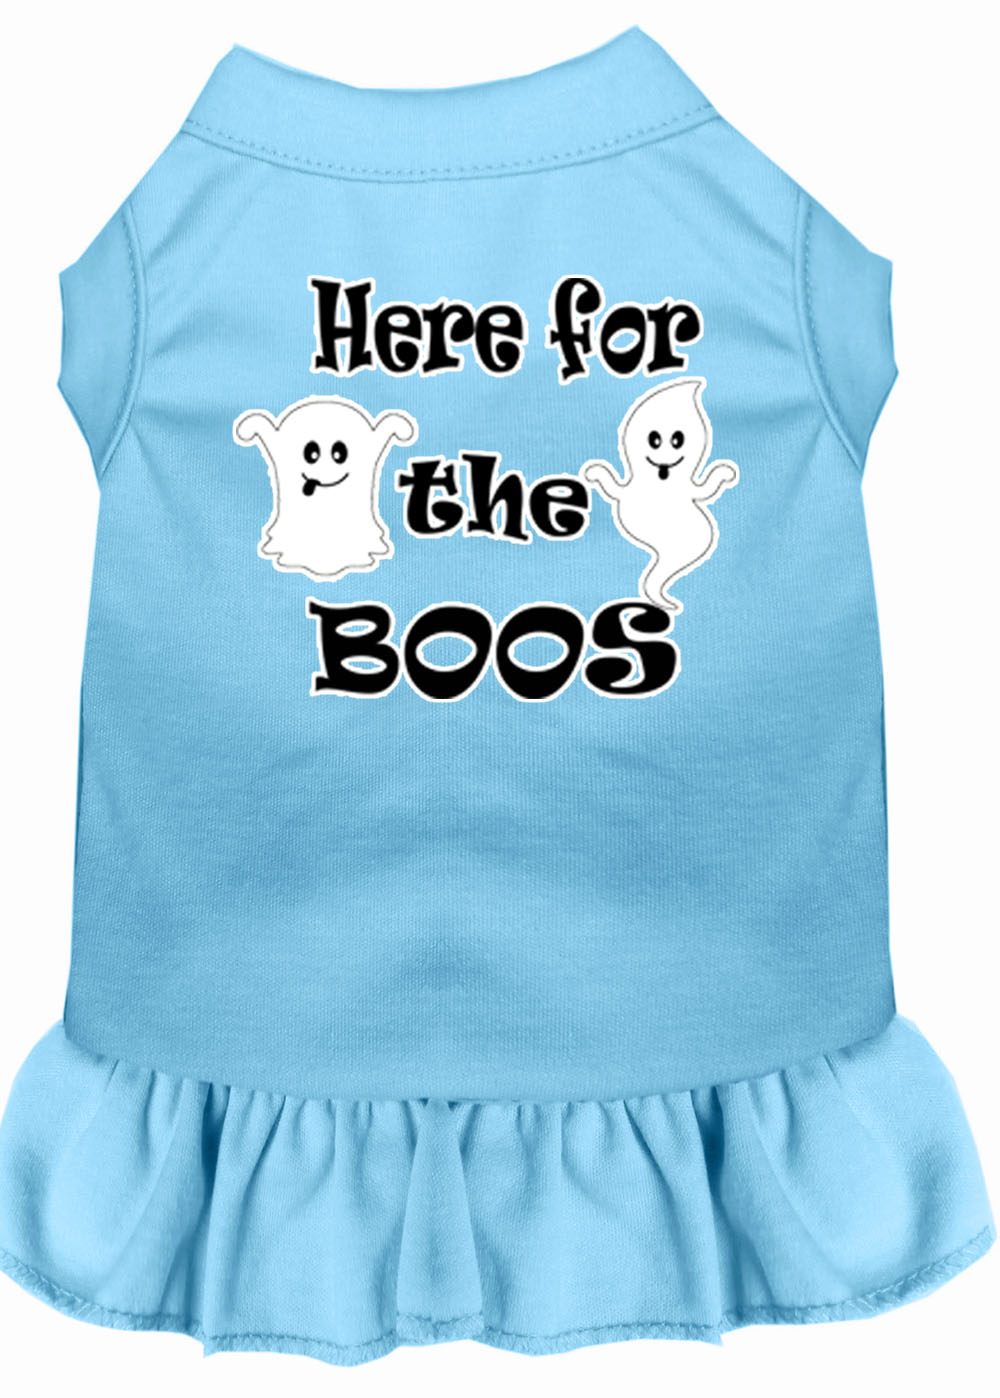 Here for the Boos Screen Print Dog Dress Baby Blue Med